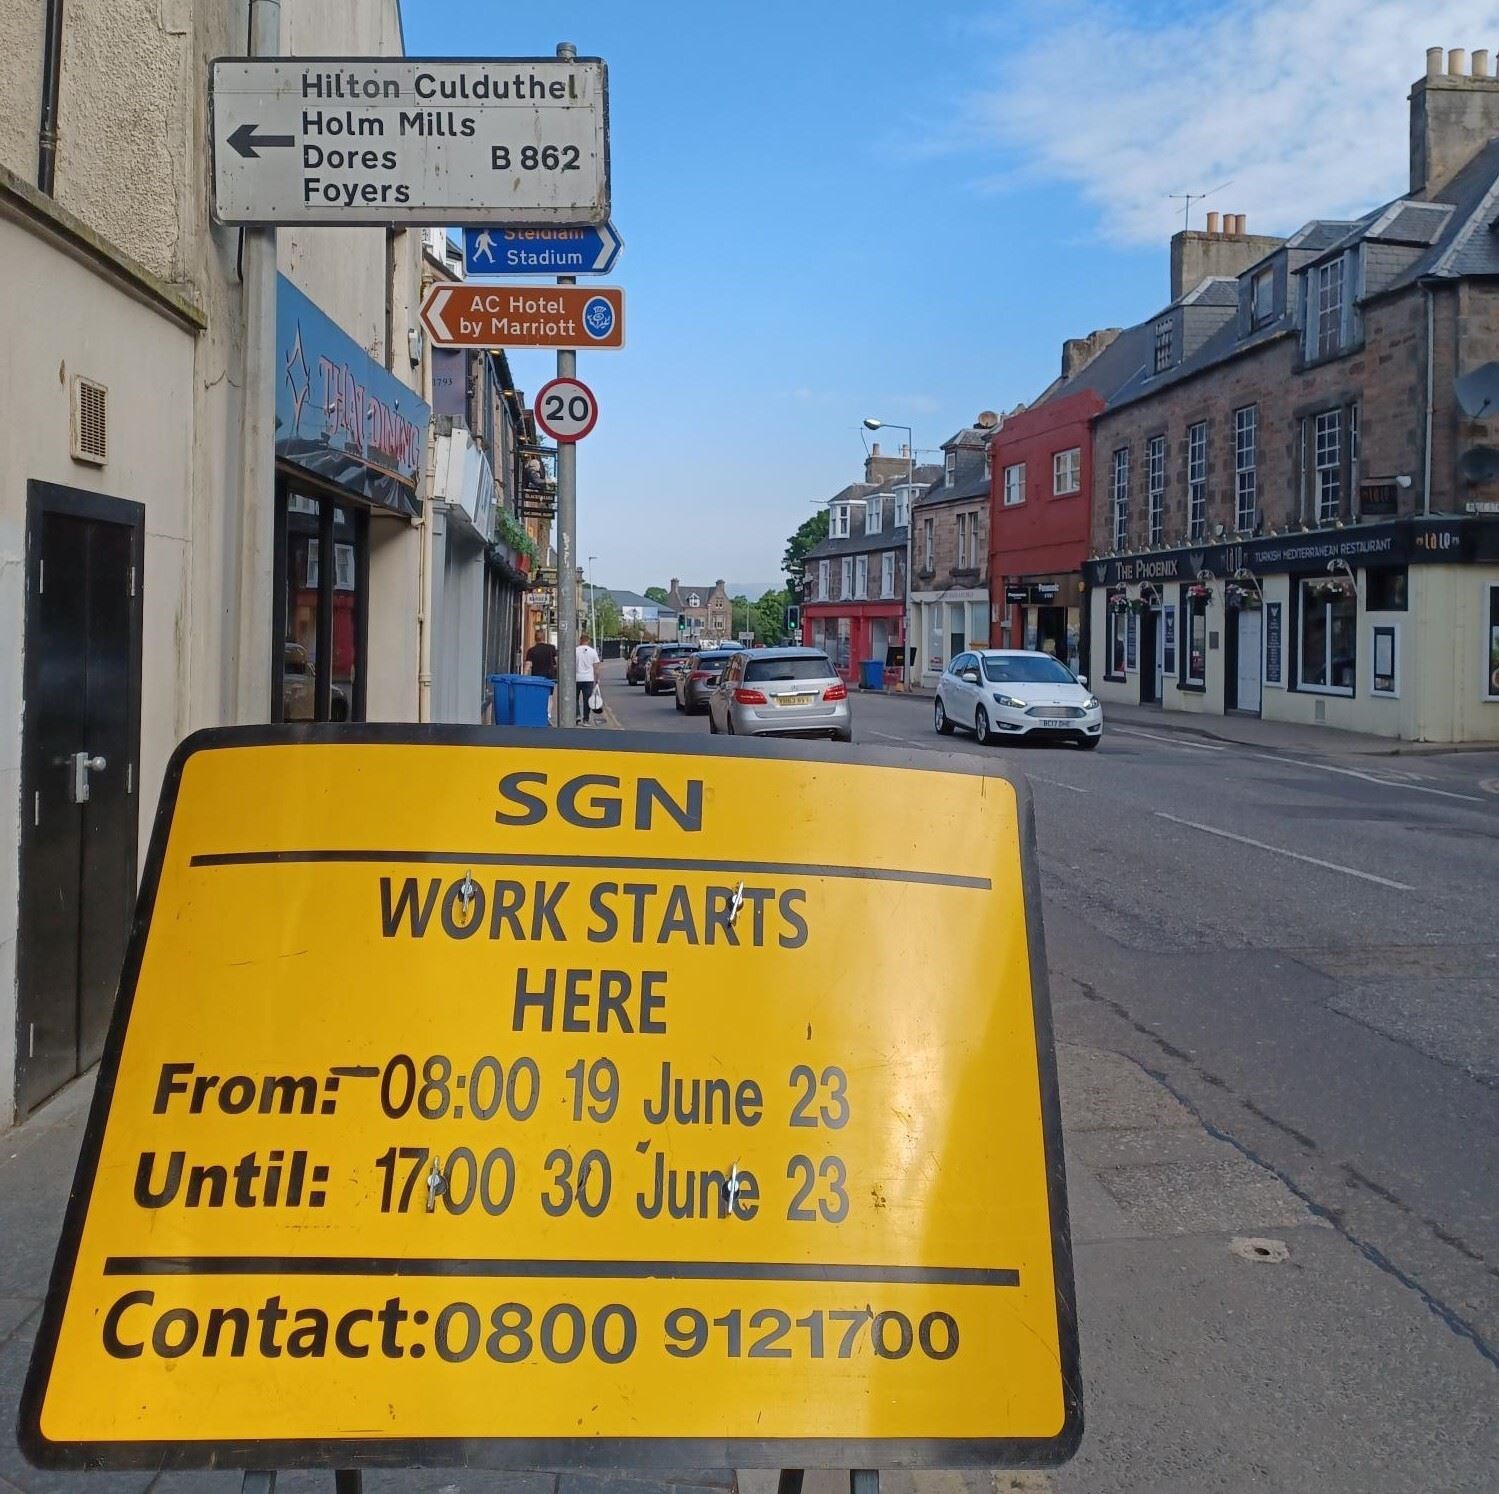 Worsk are set to start on Academy Street.